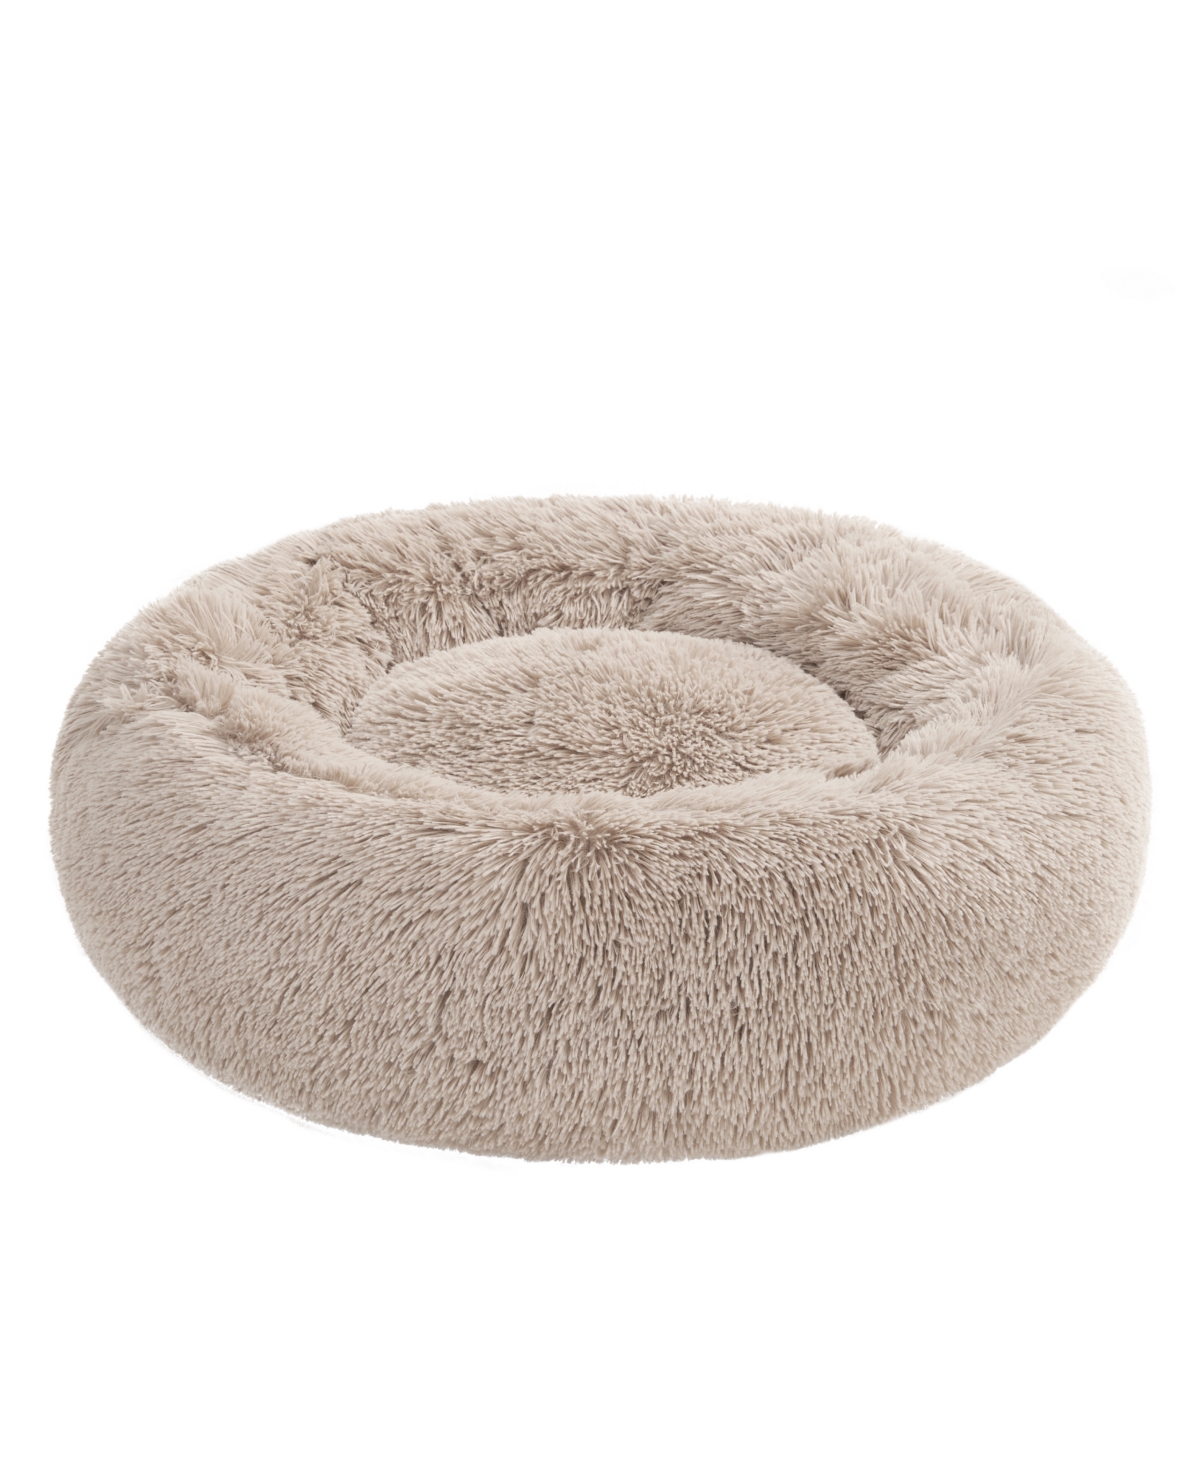 Devon Faux Fur Small Round Pet Bed for Dogs and Cats - Gray